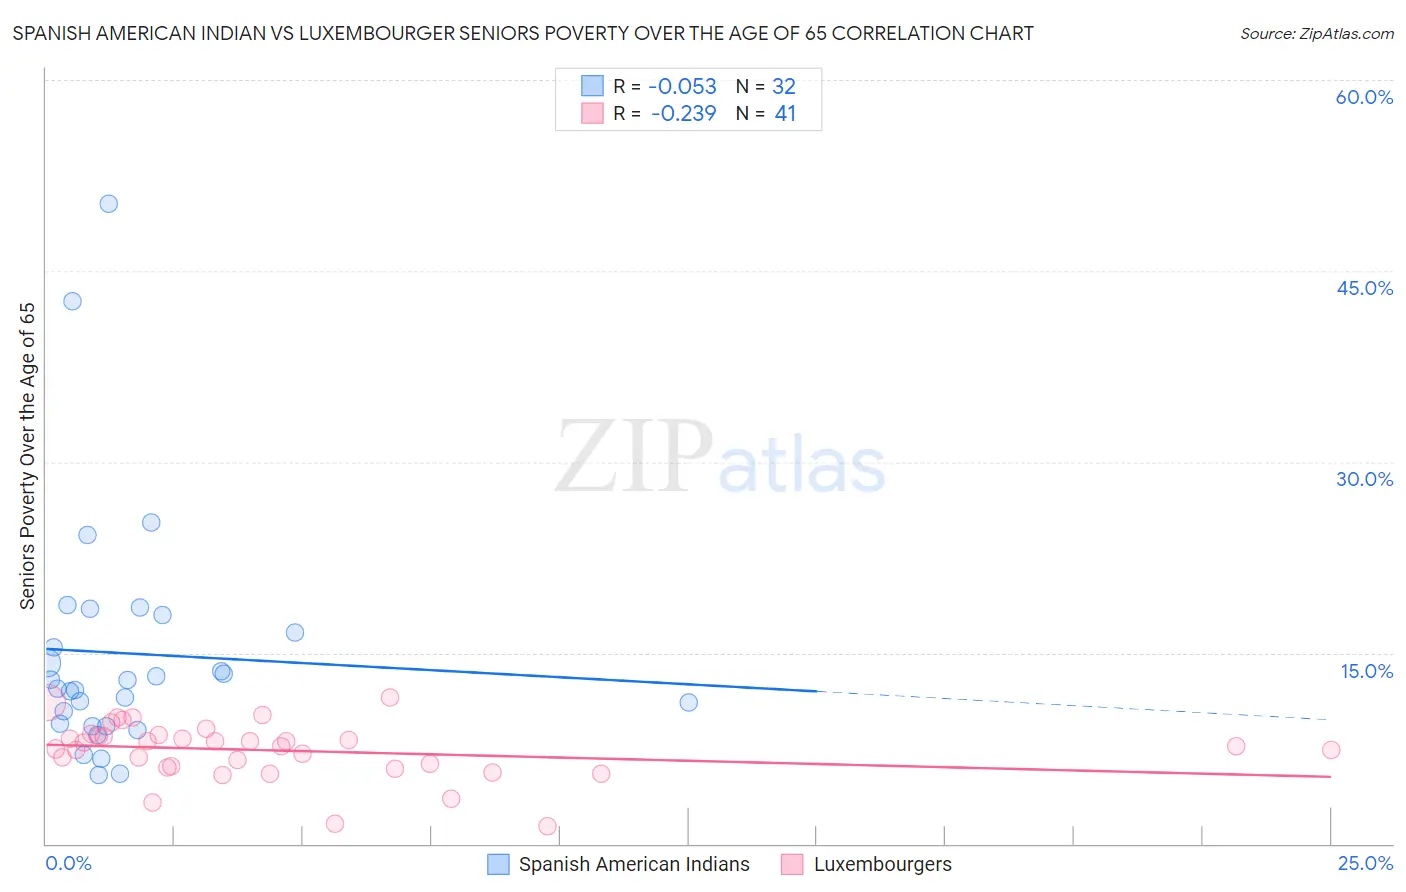 Spanish American Indian vs Luxembourger Seniors Poverty Over the Age of 65